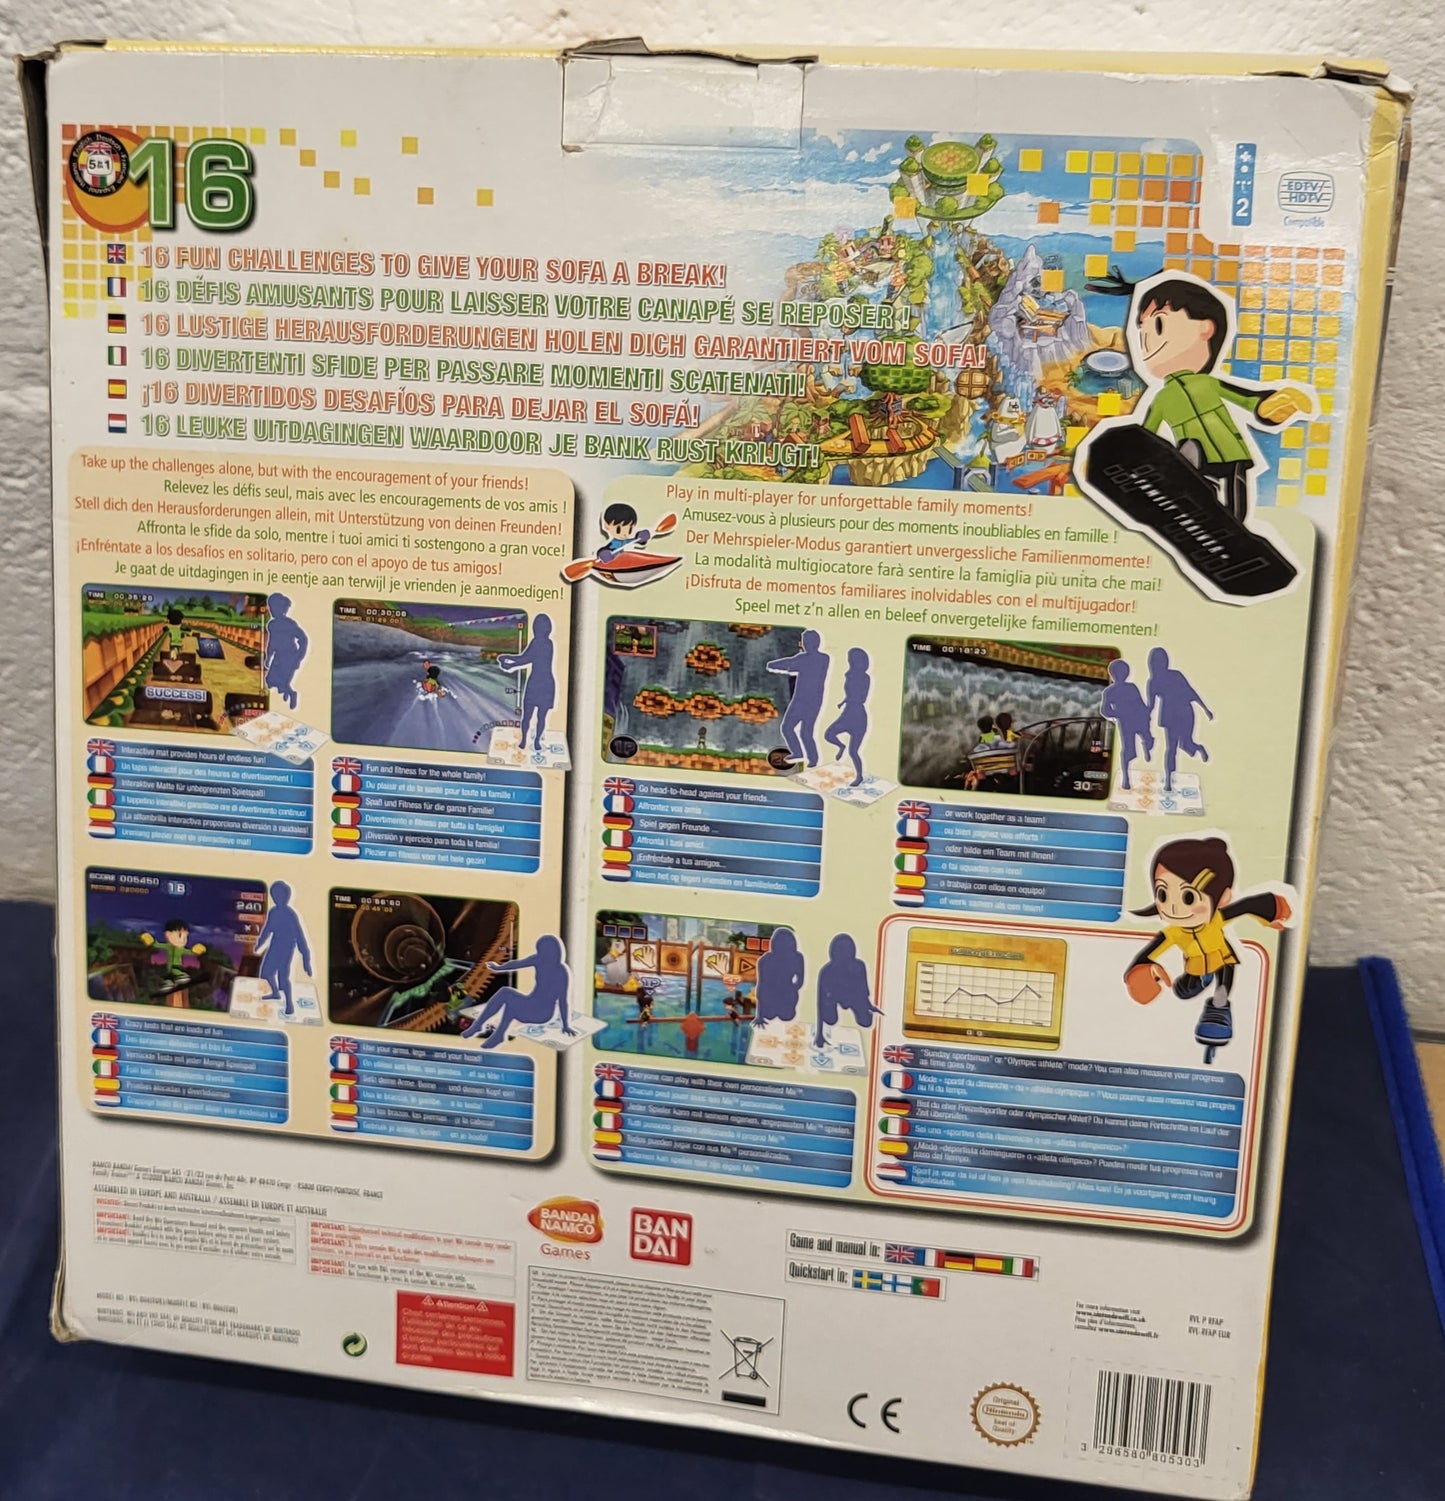 Boxed Family Trainer Nintendo Wii Game and Accessory